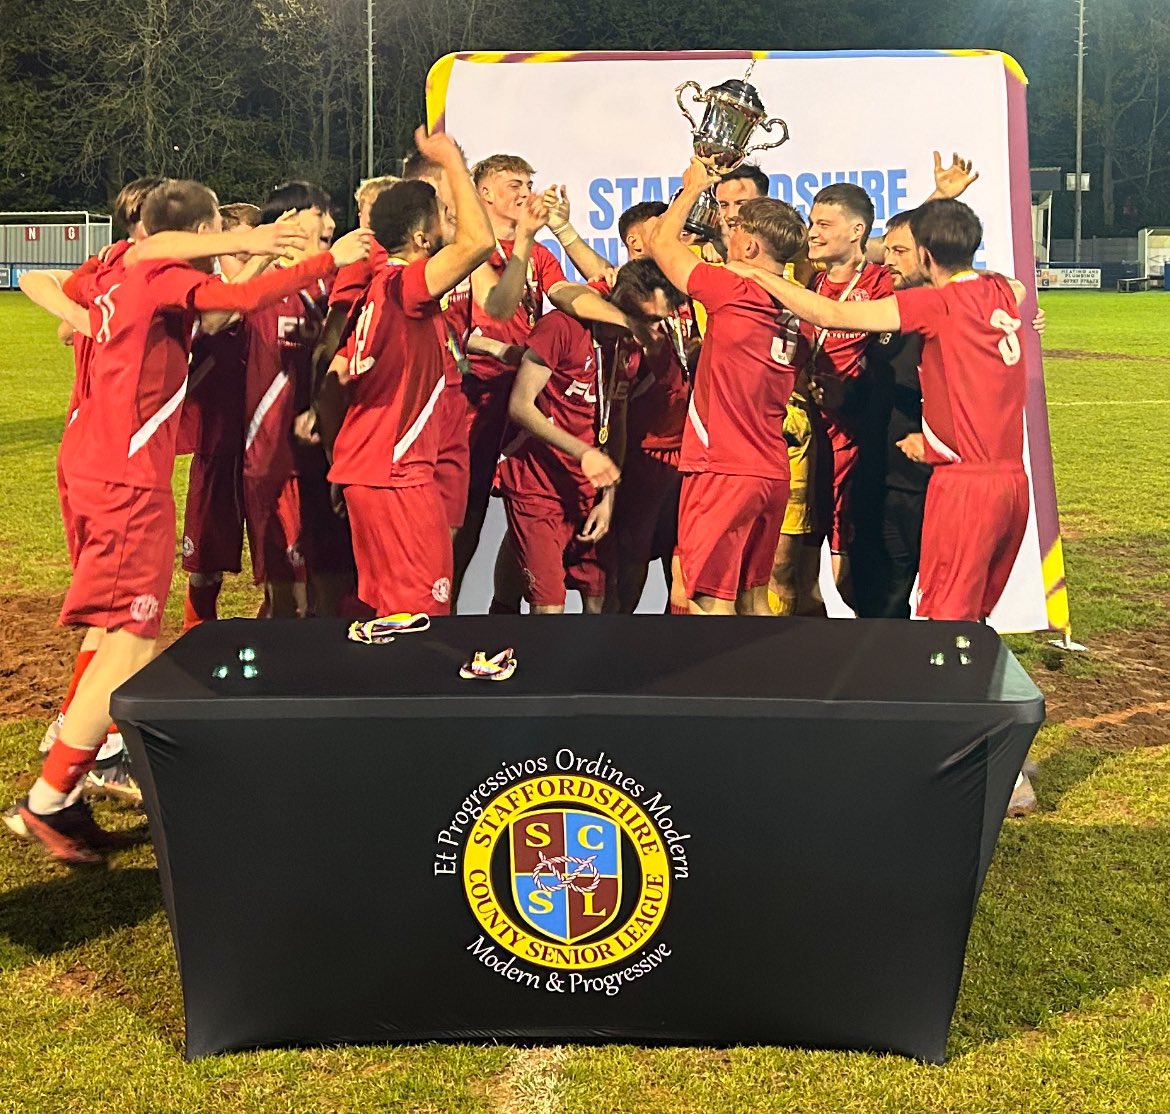 Congratulations to @StaffordTown1st Development who defeated @KeeleUniversity FC 4-3 in the @staffscountysl President’s Cup Final. We were delighted to host such a thrilling final.